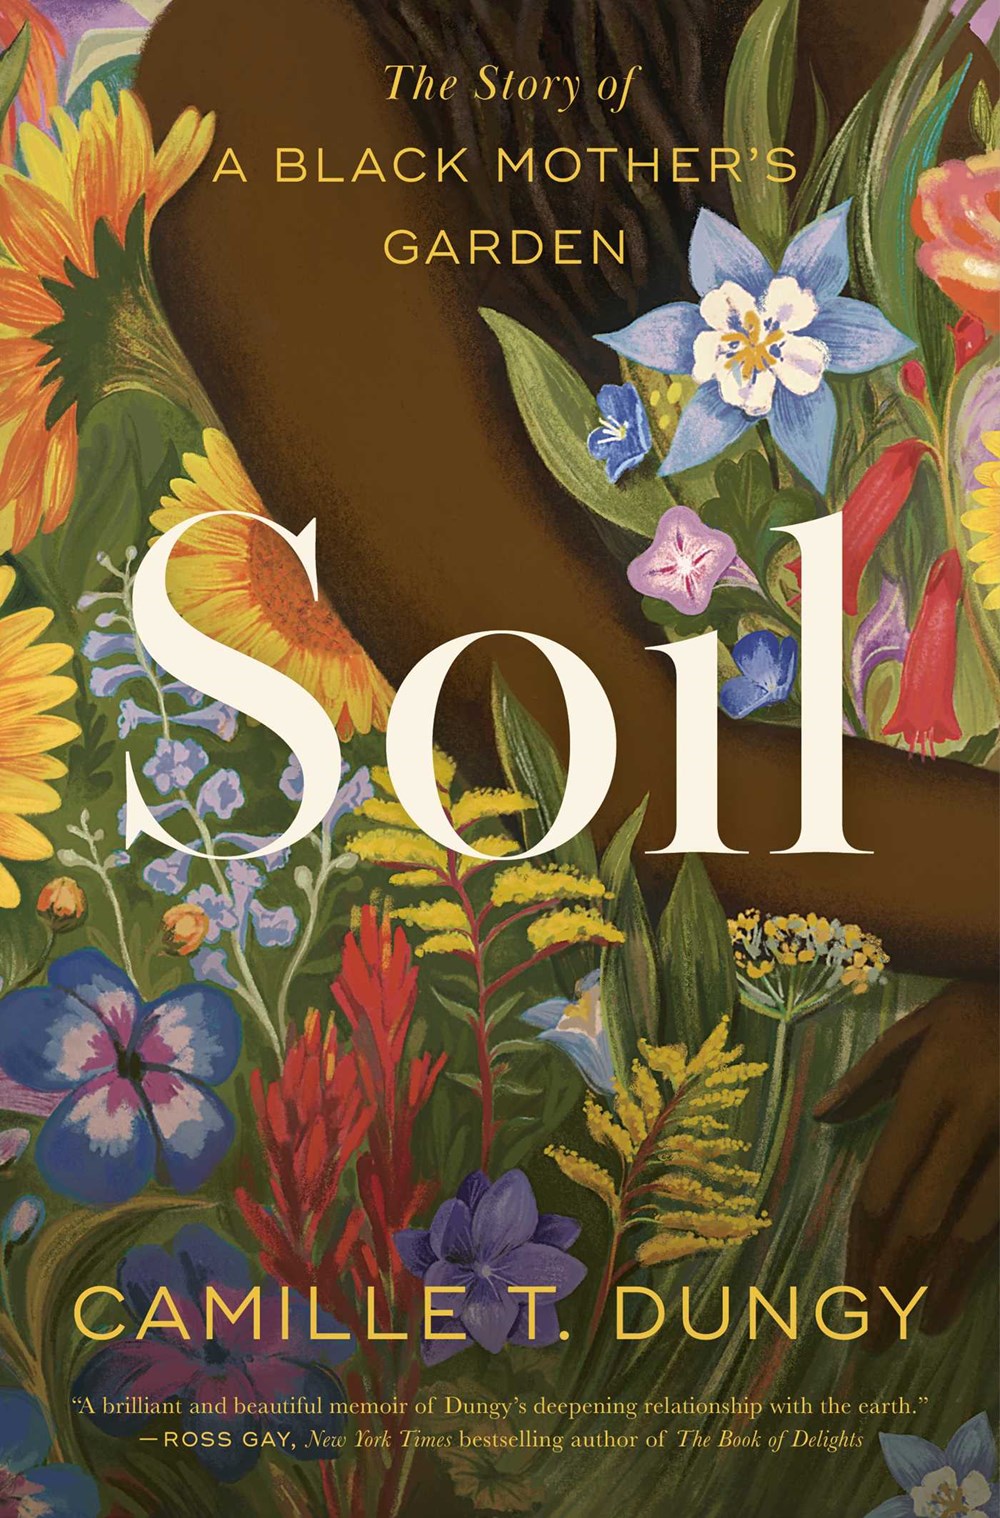 Soil : The Story of a Black Mother's Garden  by Camille T. Dungy